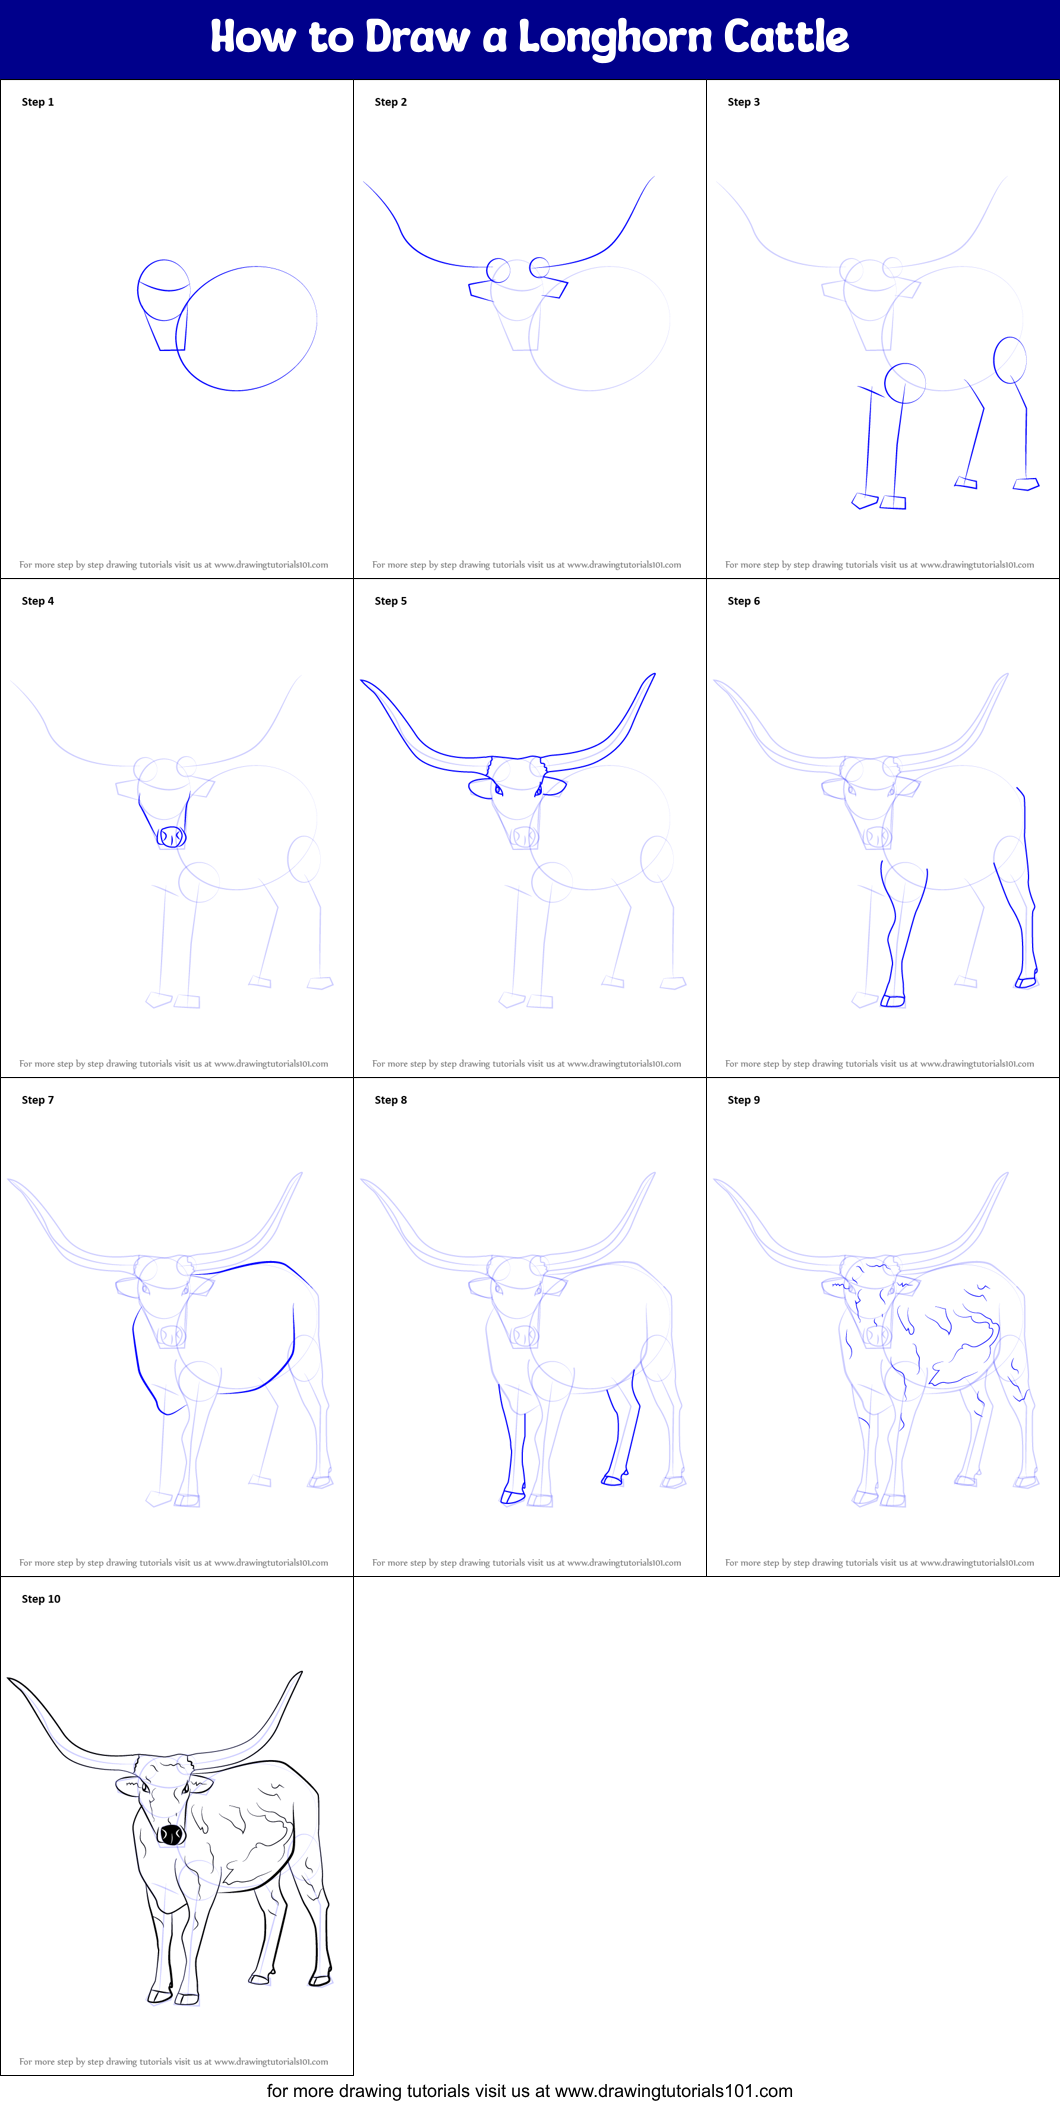 How to Draw a Longhorn Cattle printable step by step drawing sheet